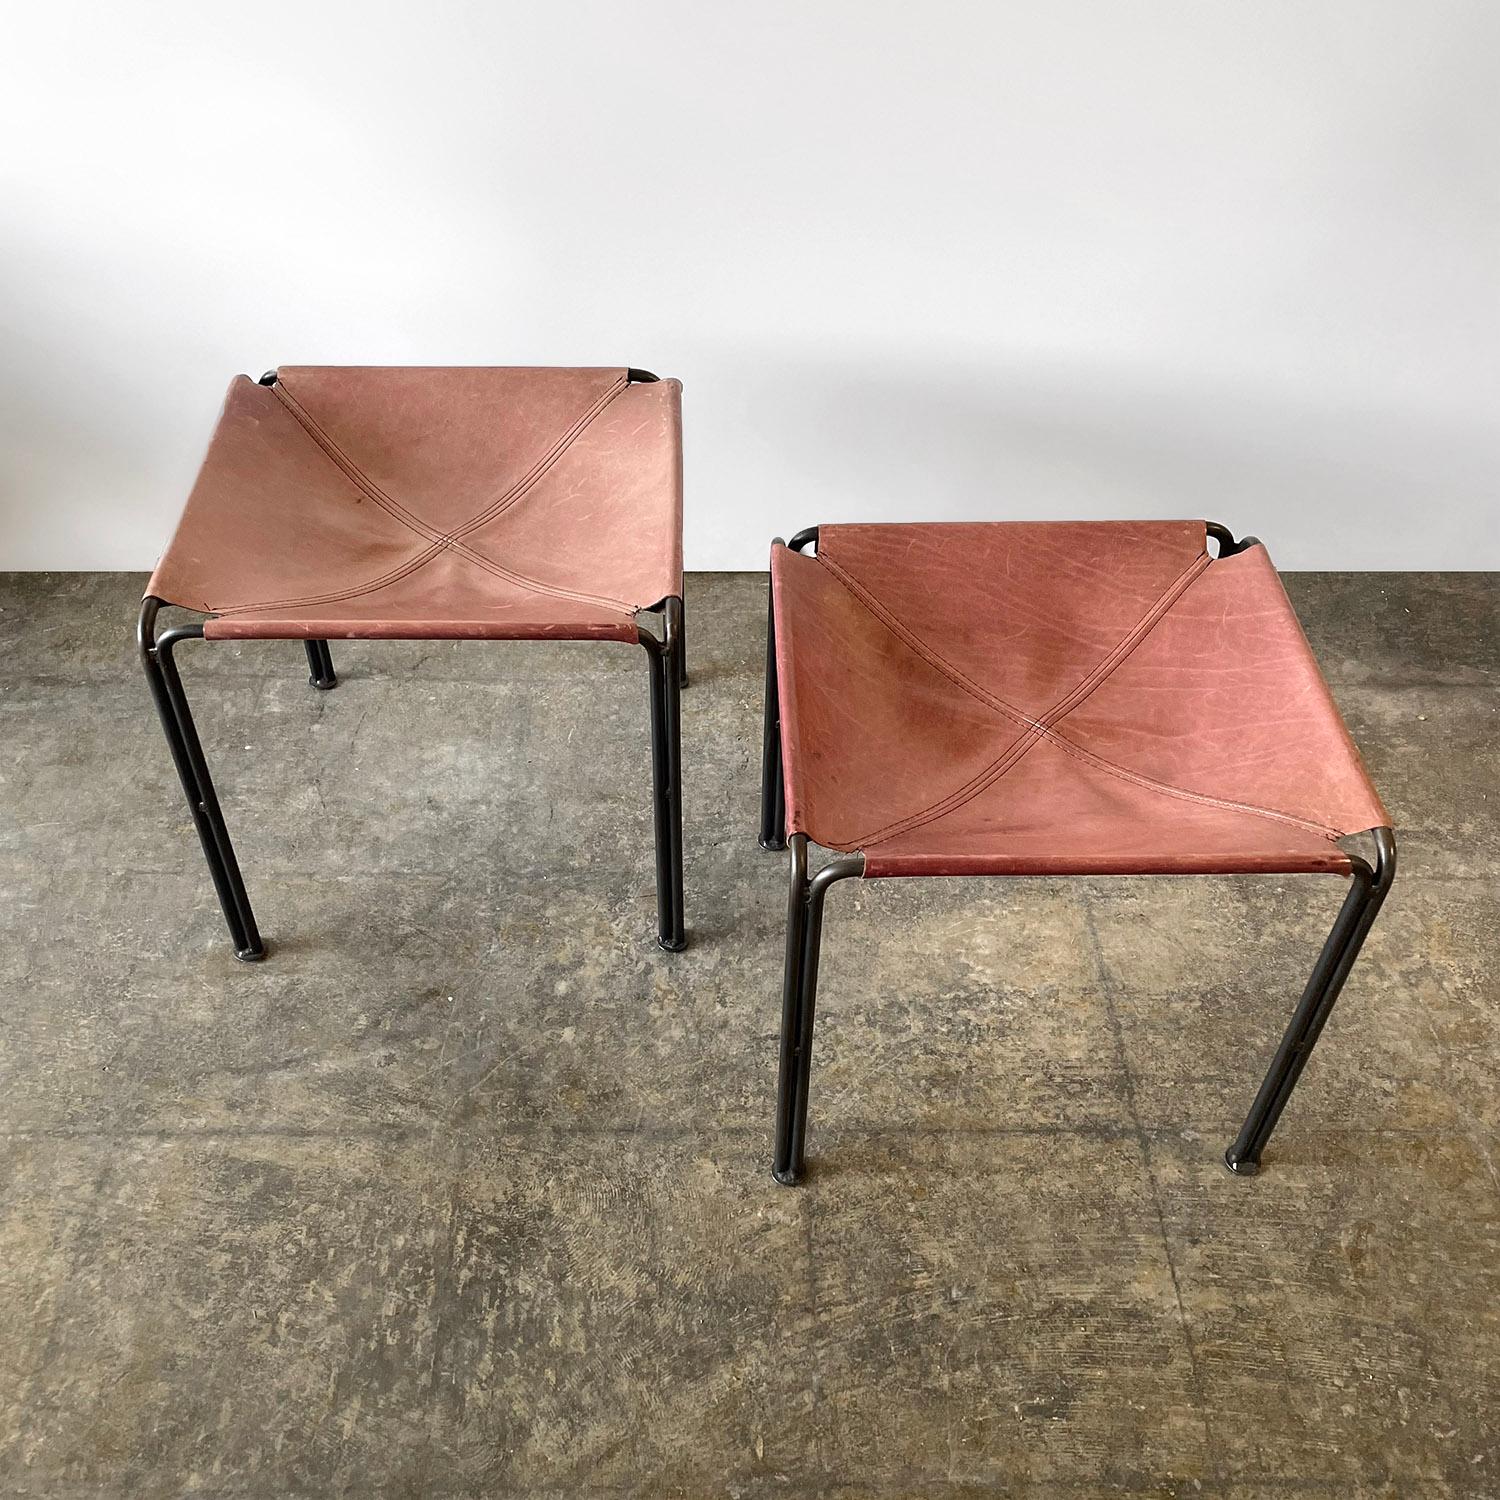 Rose leather & iron sling stools.
Soft rose tone leather stools are perfectly aged and worn in - each is uniquely distressed
Sleek bent iron frames.
Patina from age and use.